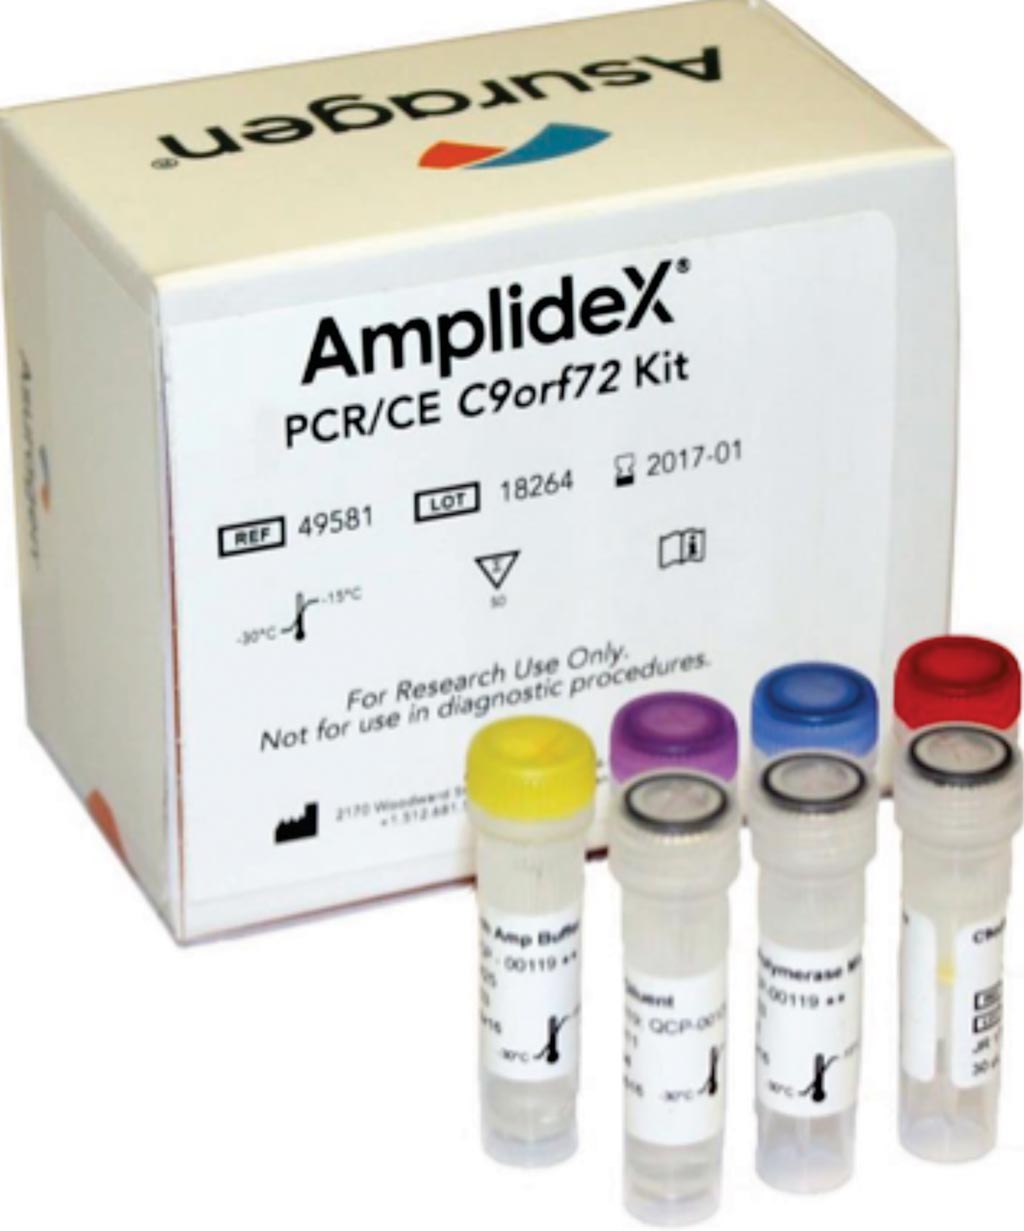 Image: The AmplideX PCR/CE C9orf72 assay kit (Photo courtesy of Asuragen).